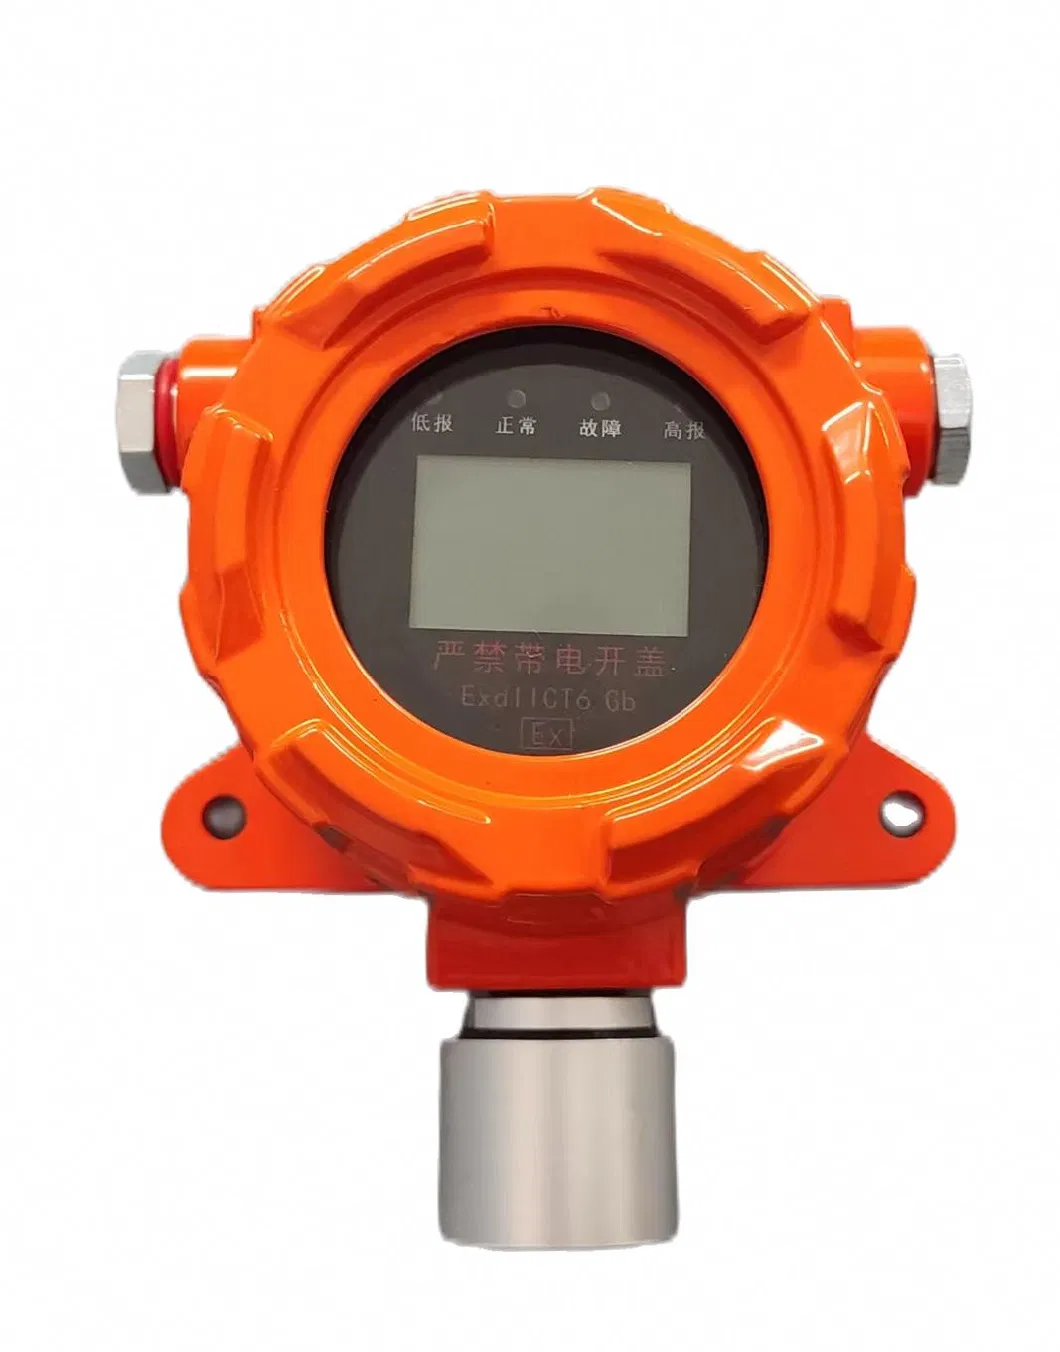 Ex-Proof O2 H2s CH4 Co No2 Toxic/Combustible Gas Transmitter and Controller Monitor